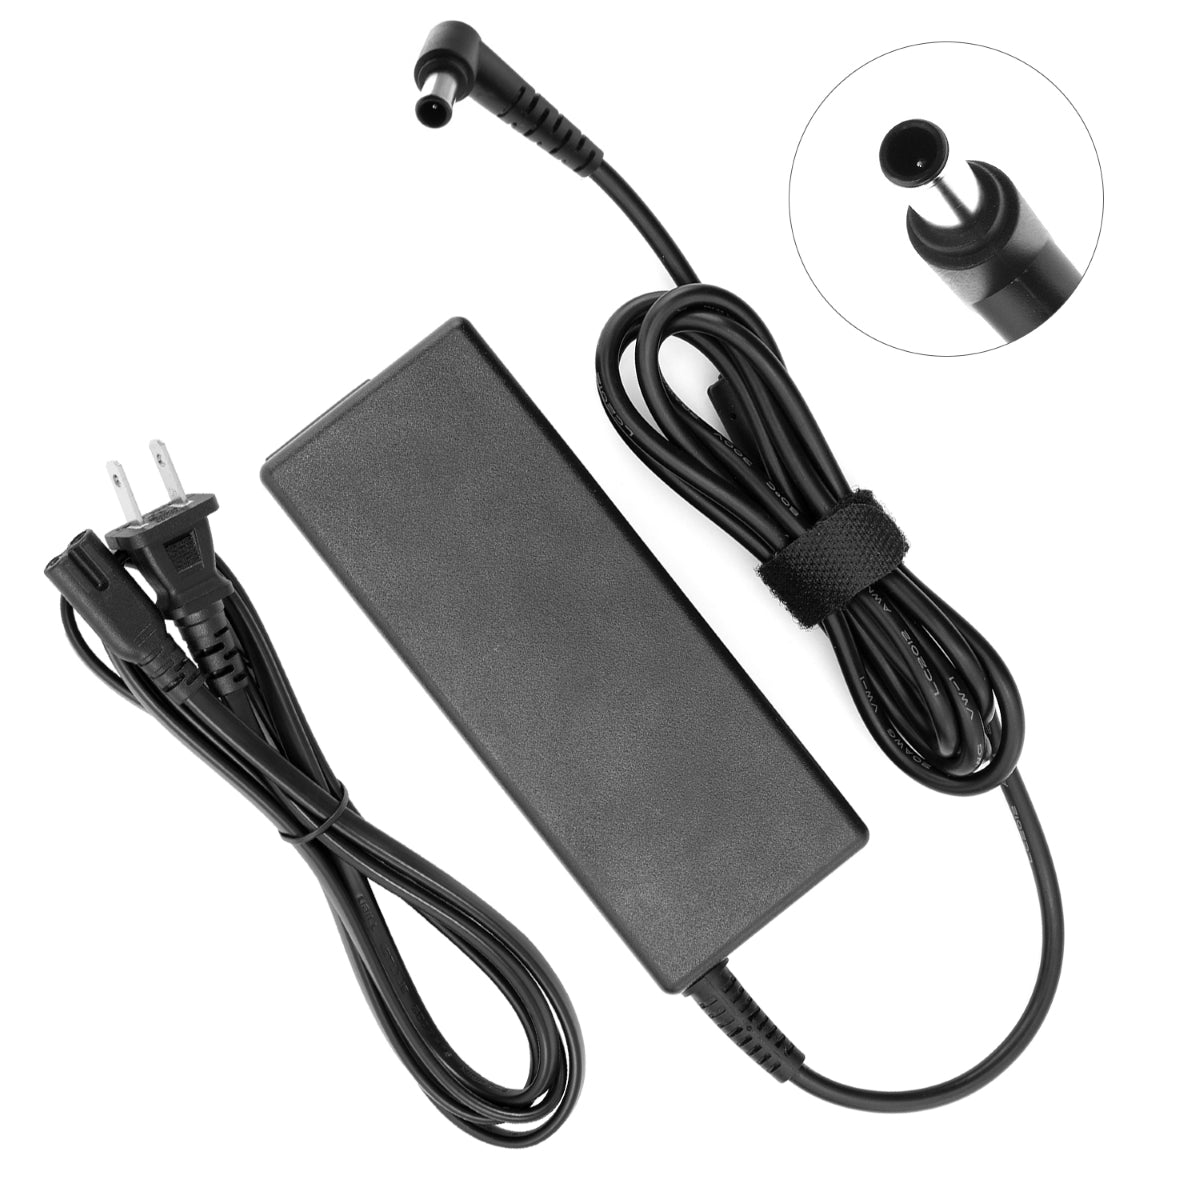 Power Adapter for LG 24GN50W-B Monitor TV